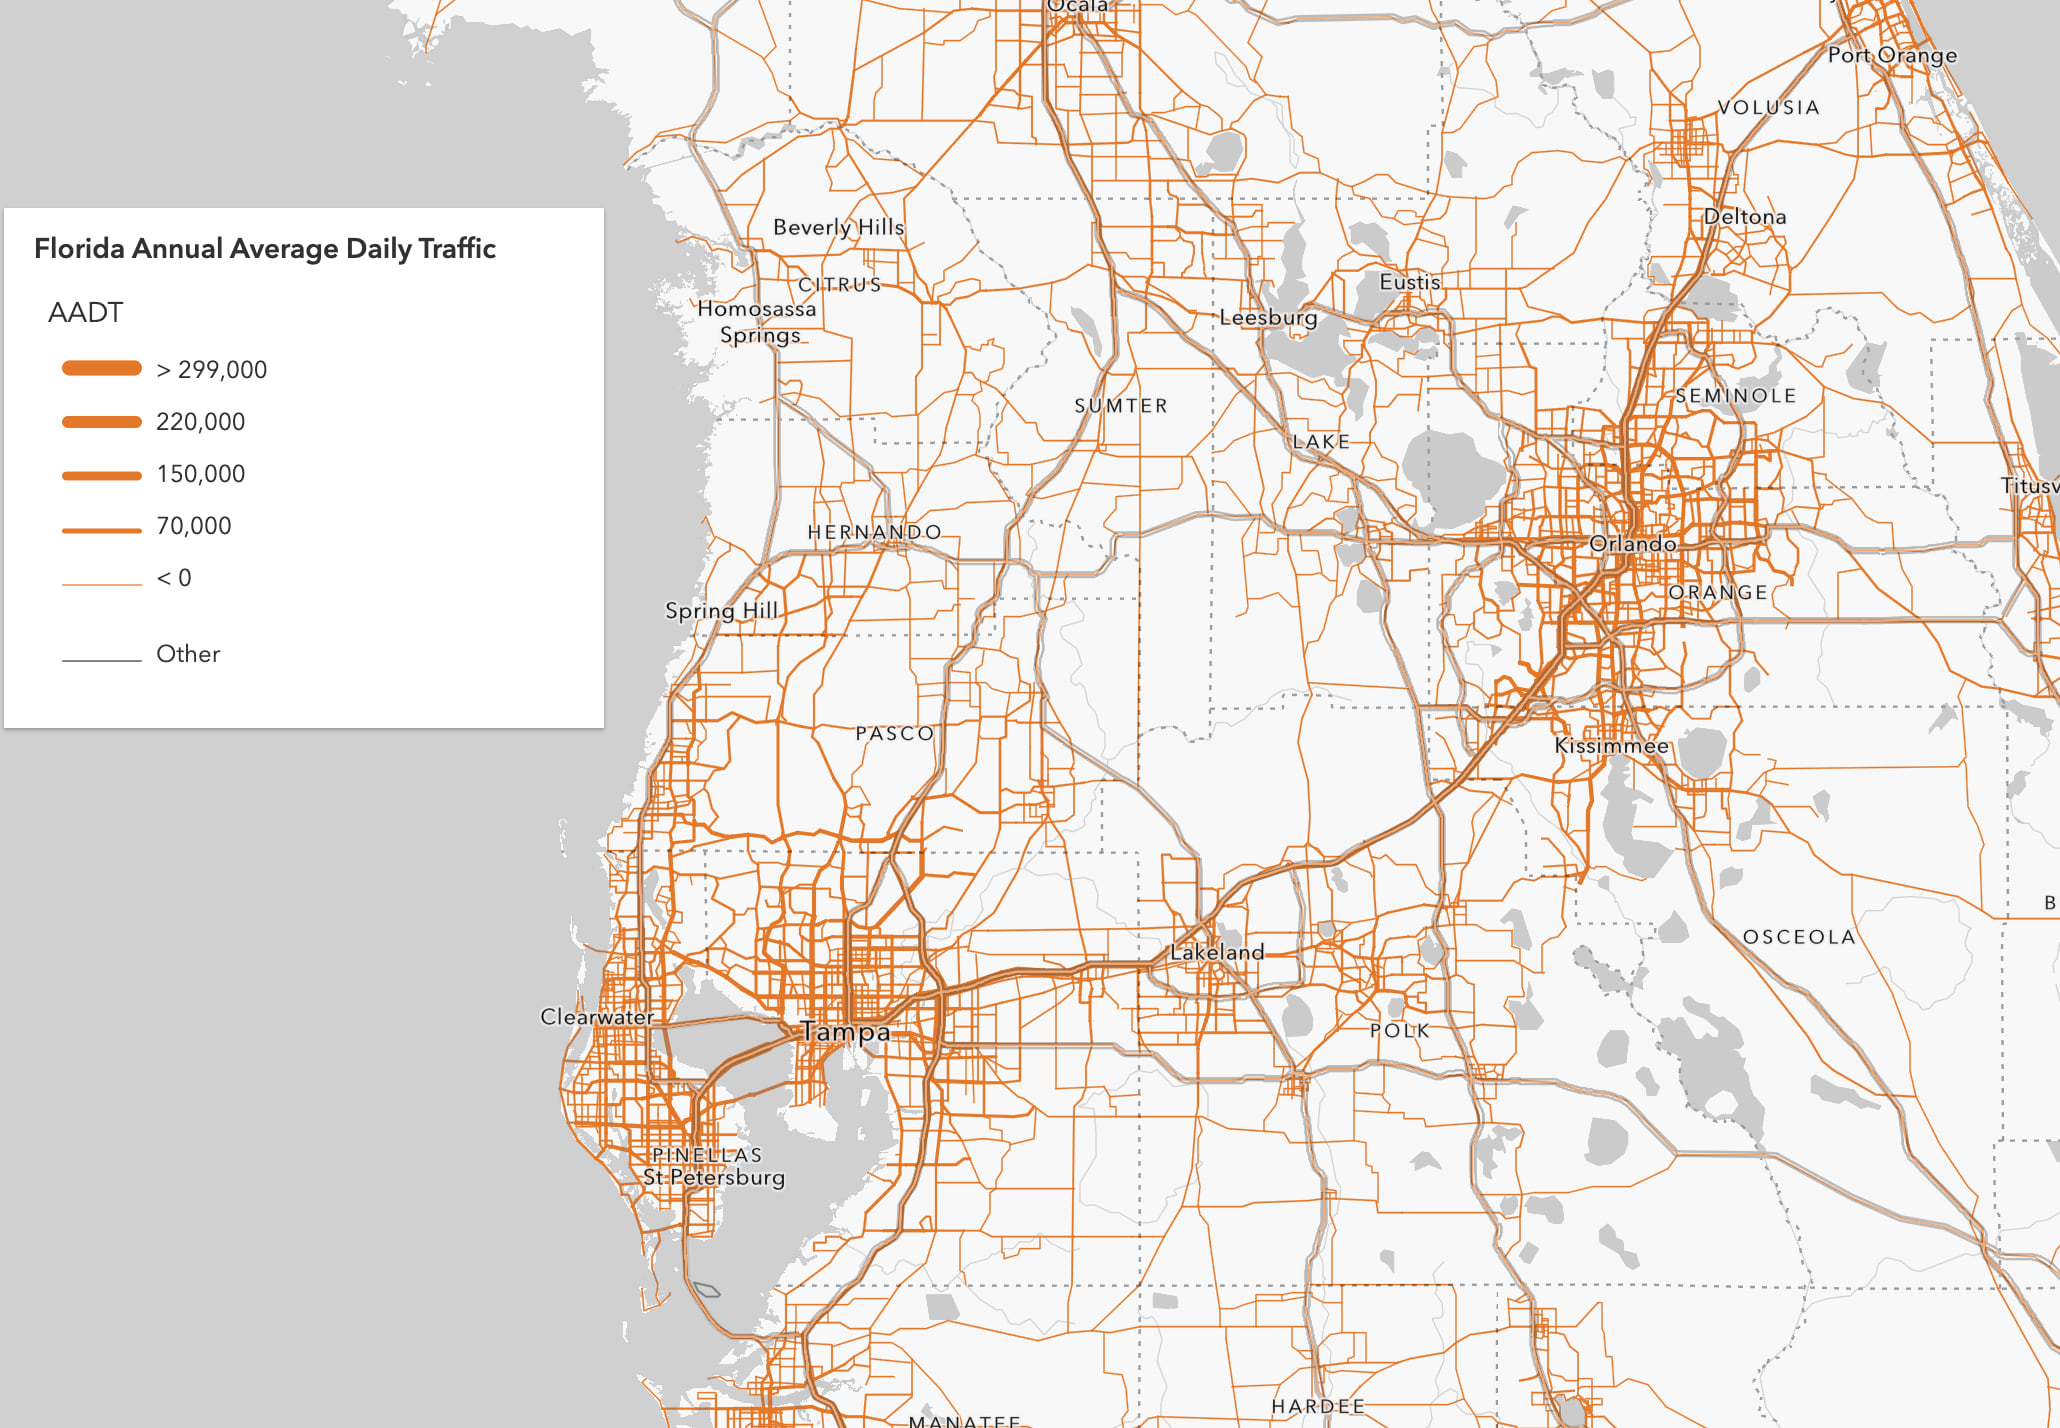 Annual average daily traffic on Florida highways. Thicker lines indicate heavier traffic.